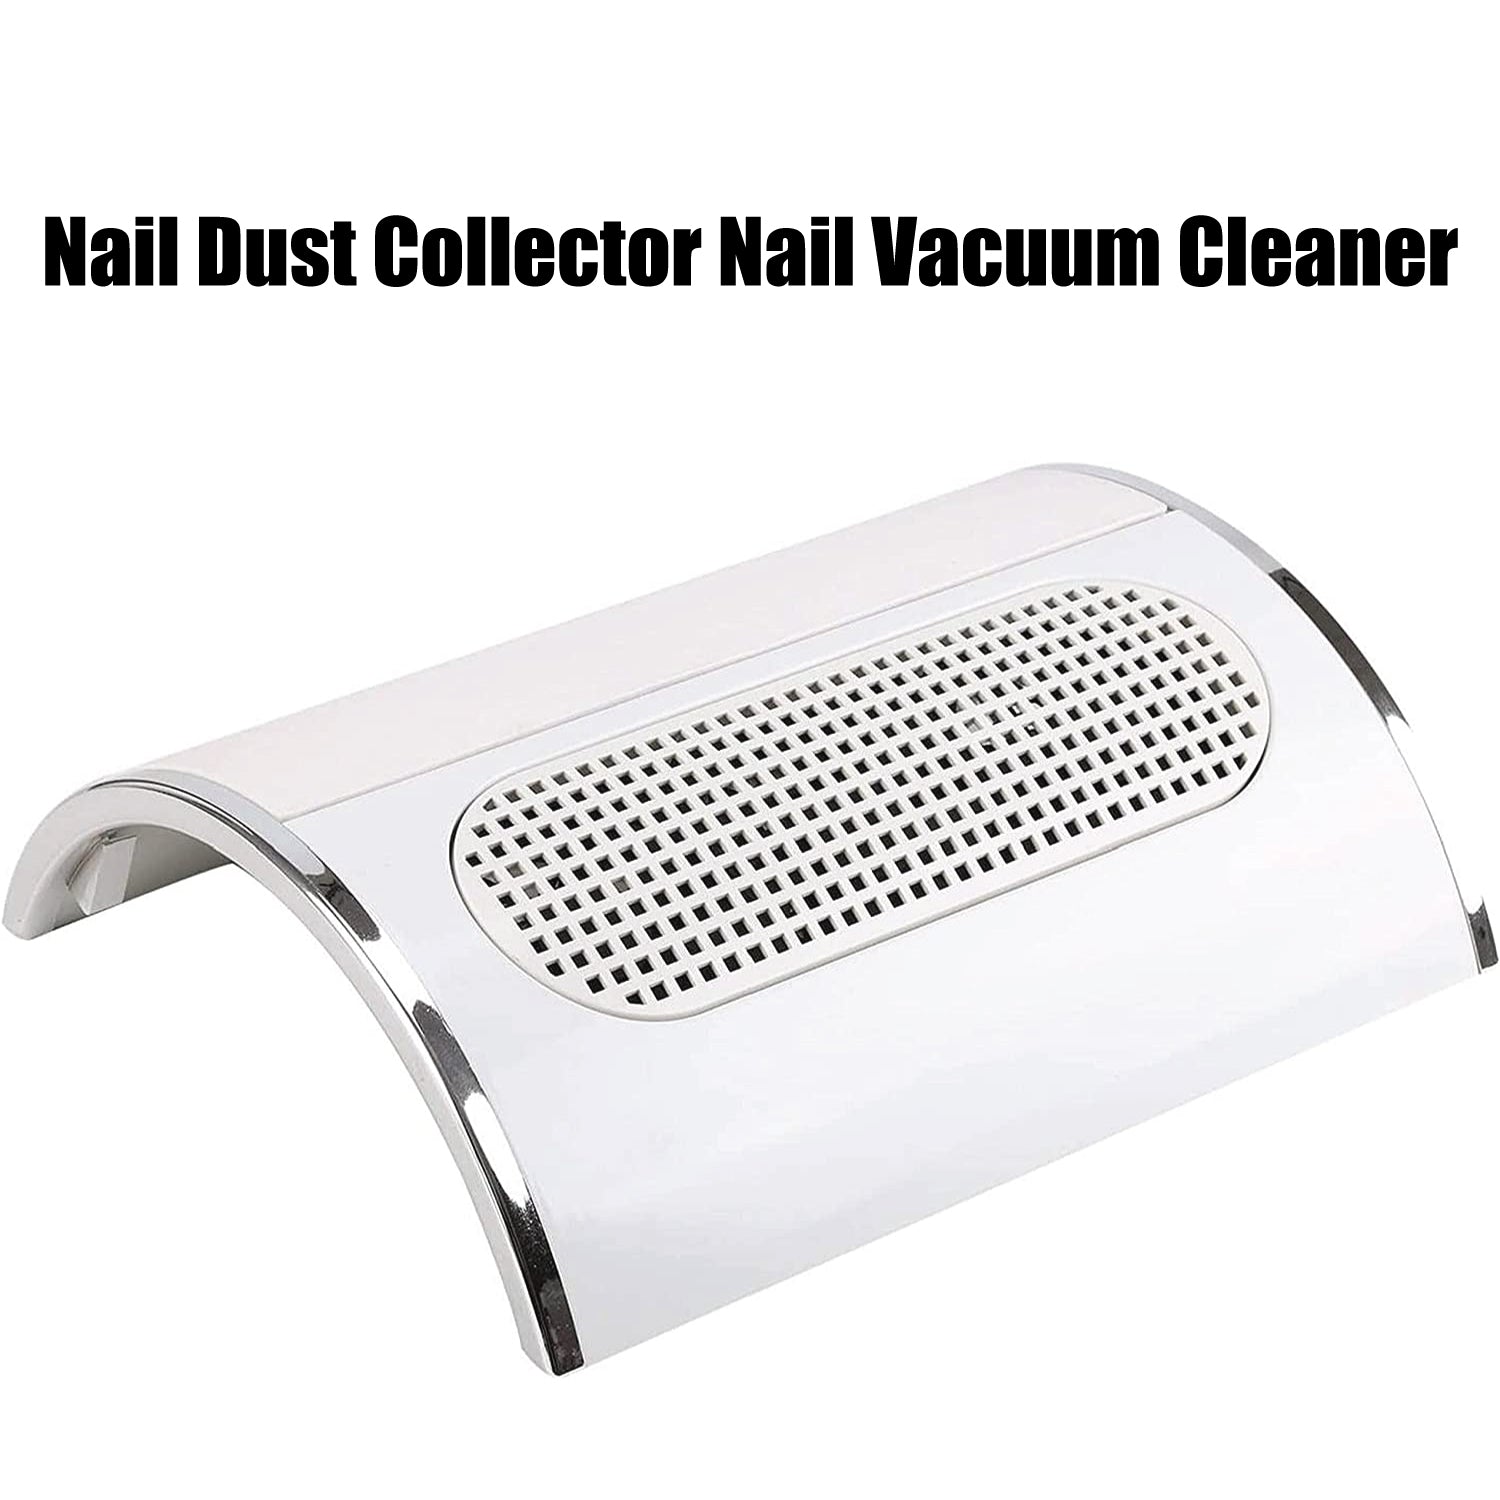 Plate for Nail Dust Collector